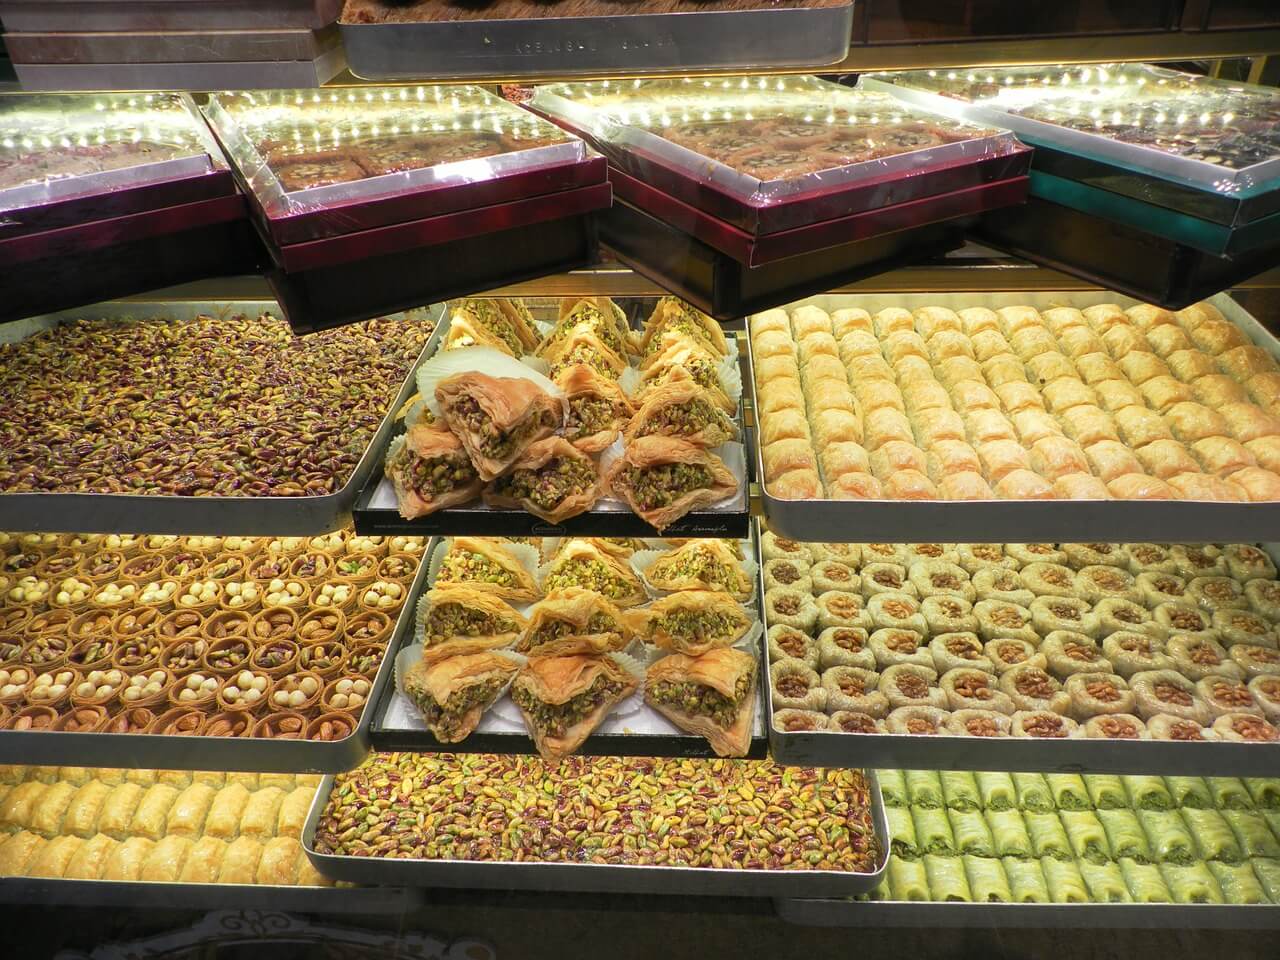 A 'delectable' view of the Turkish desserts in the Bazaar